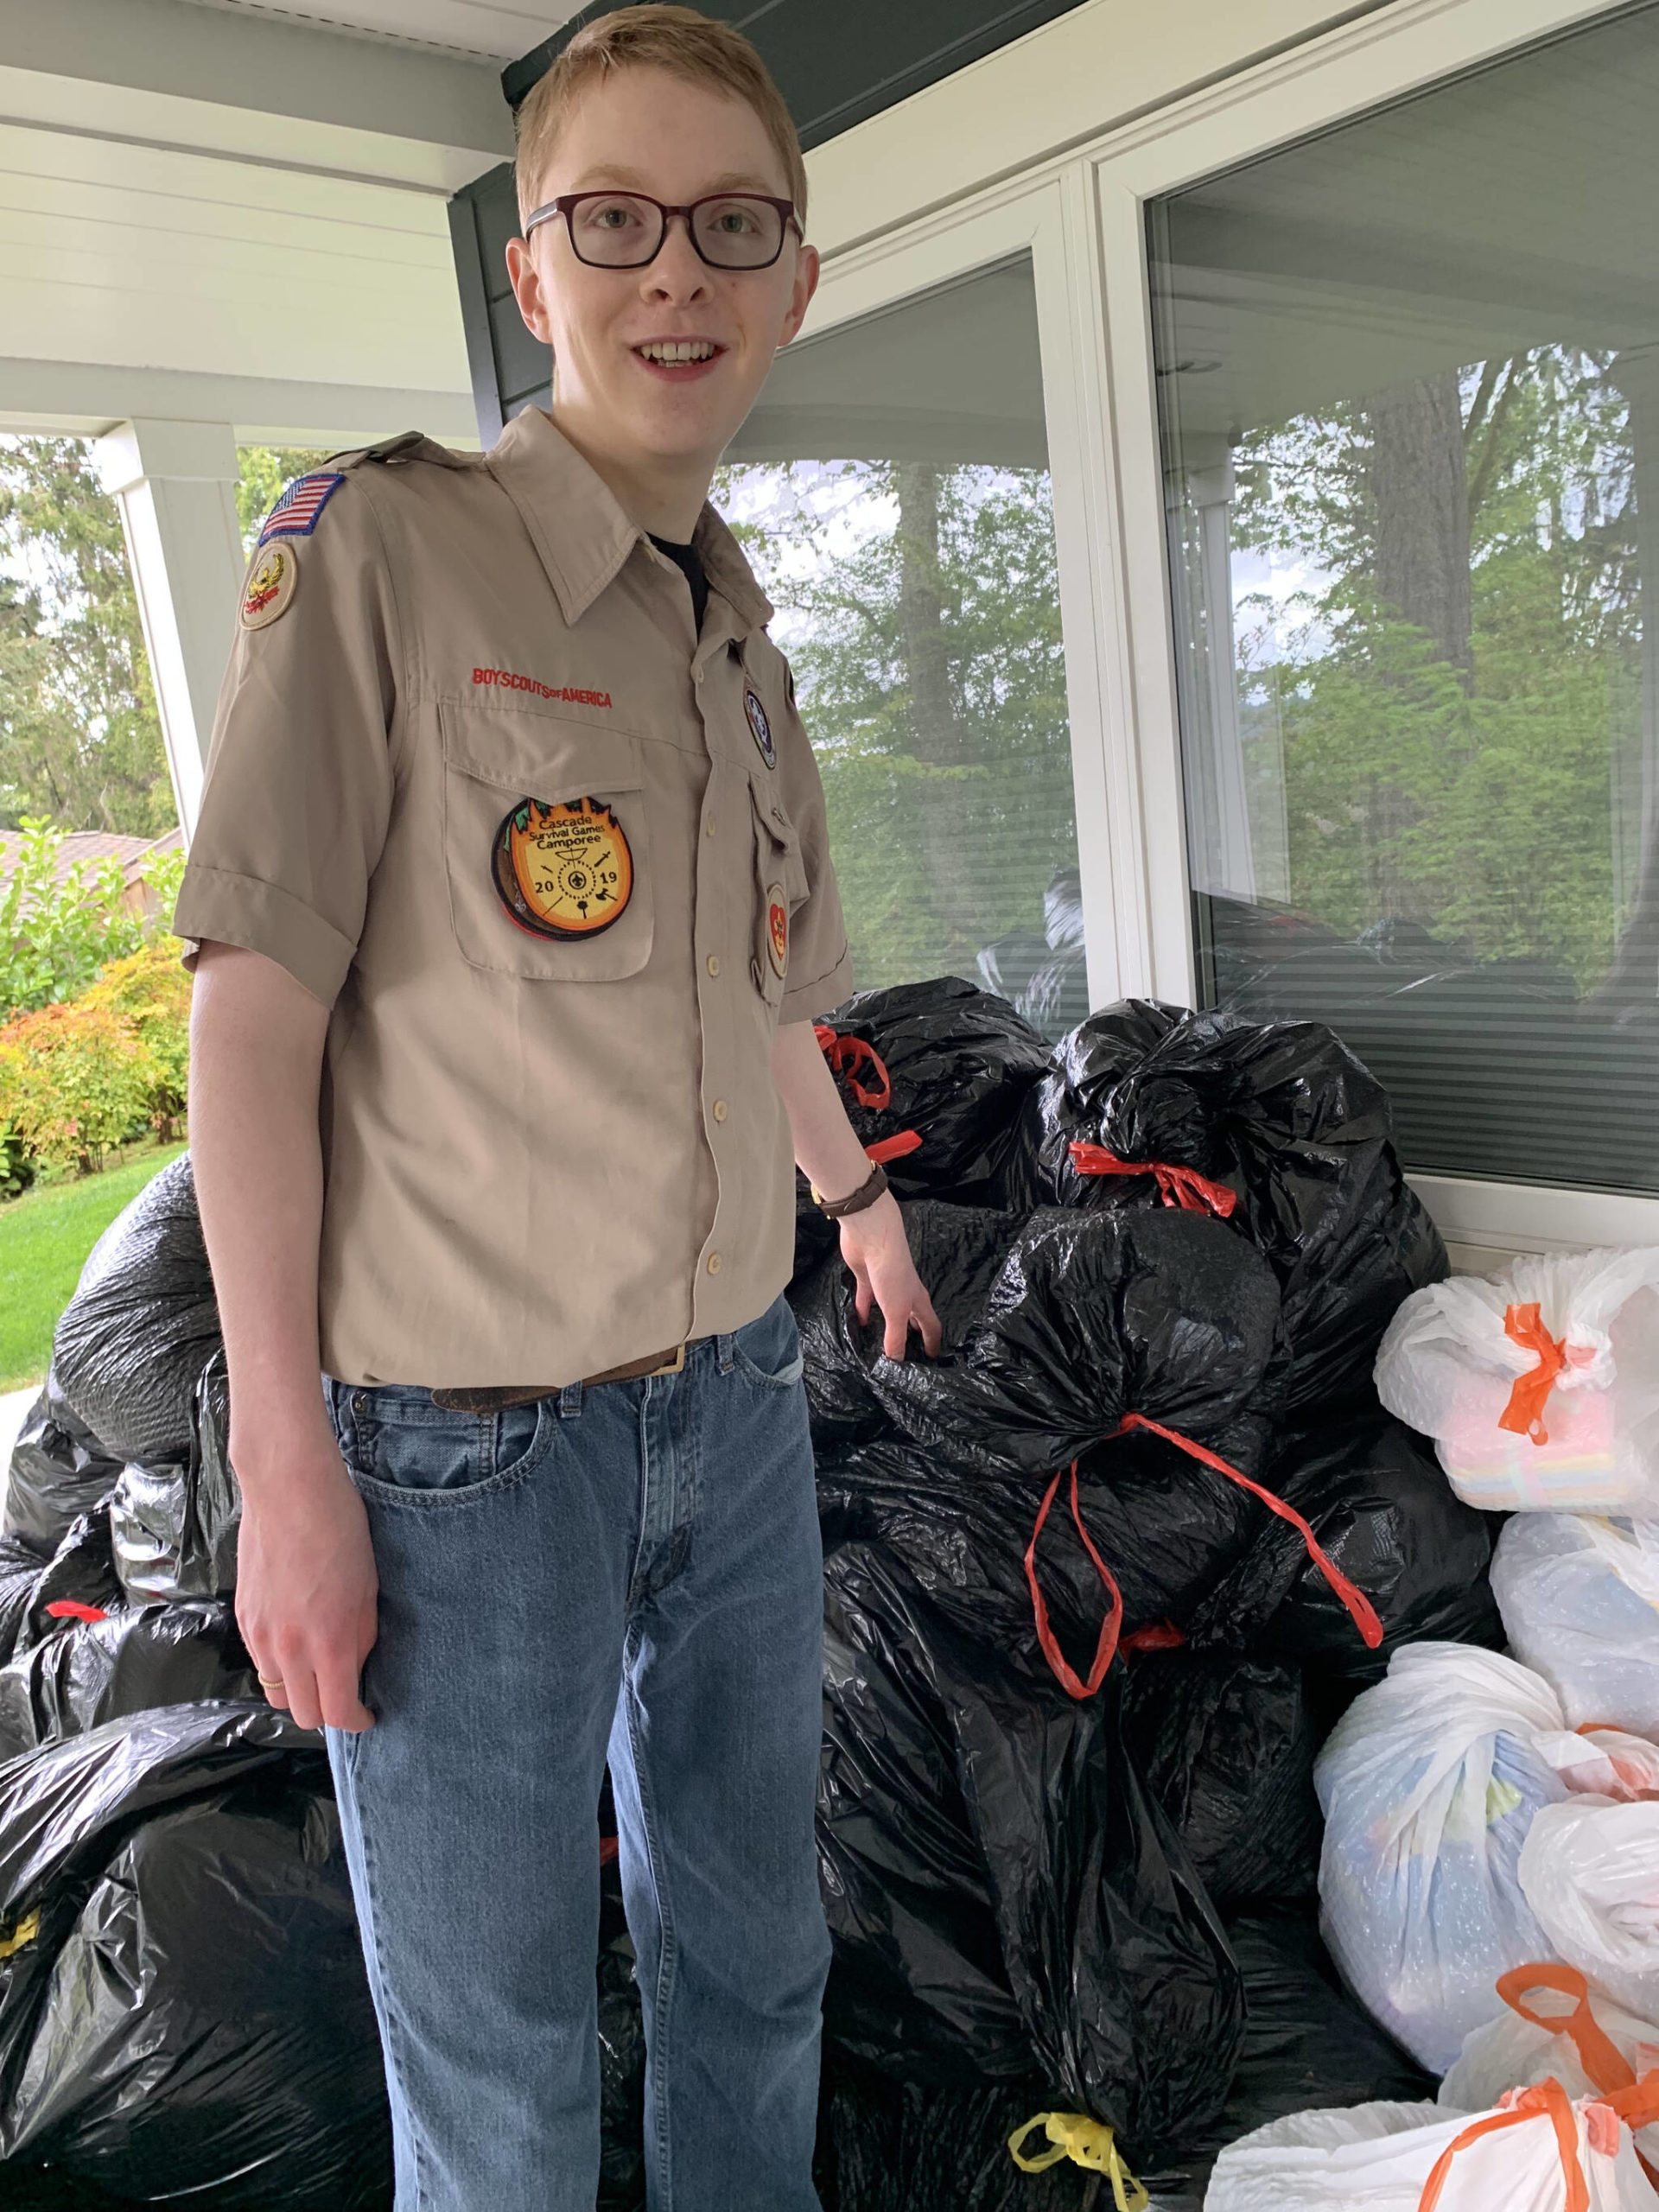 Covenant Living at the Shores residents of Mercer Island collected more than a dozen bags full of items for local high school senior and Eagle Scout Josiah Postma. Postma asked residents for help with donations of clothing and hygiene products to give to the Seattle-based Genesis Project. The nonprofit is dedicated to helping teenage girls and women who are survivors of sexual exploitation. Postma is a member of Mercer Island’s Scout Troop #647. Courtesy photo